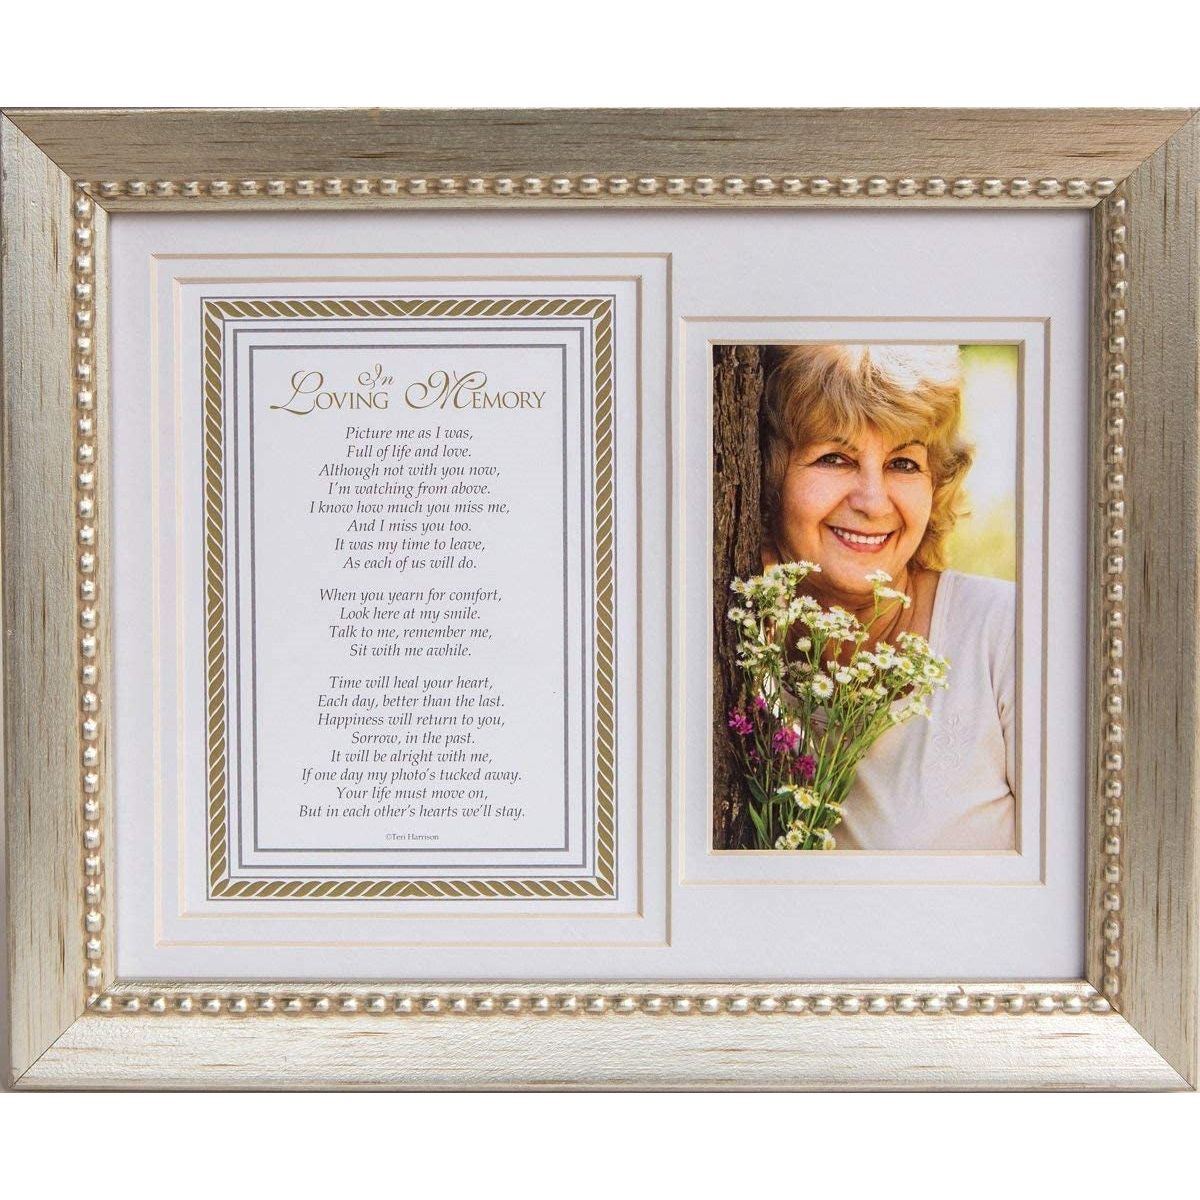 8x10 silver-toned beaded wood frame with white double mat "In Loving Memory" poem and opening for a photo.